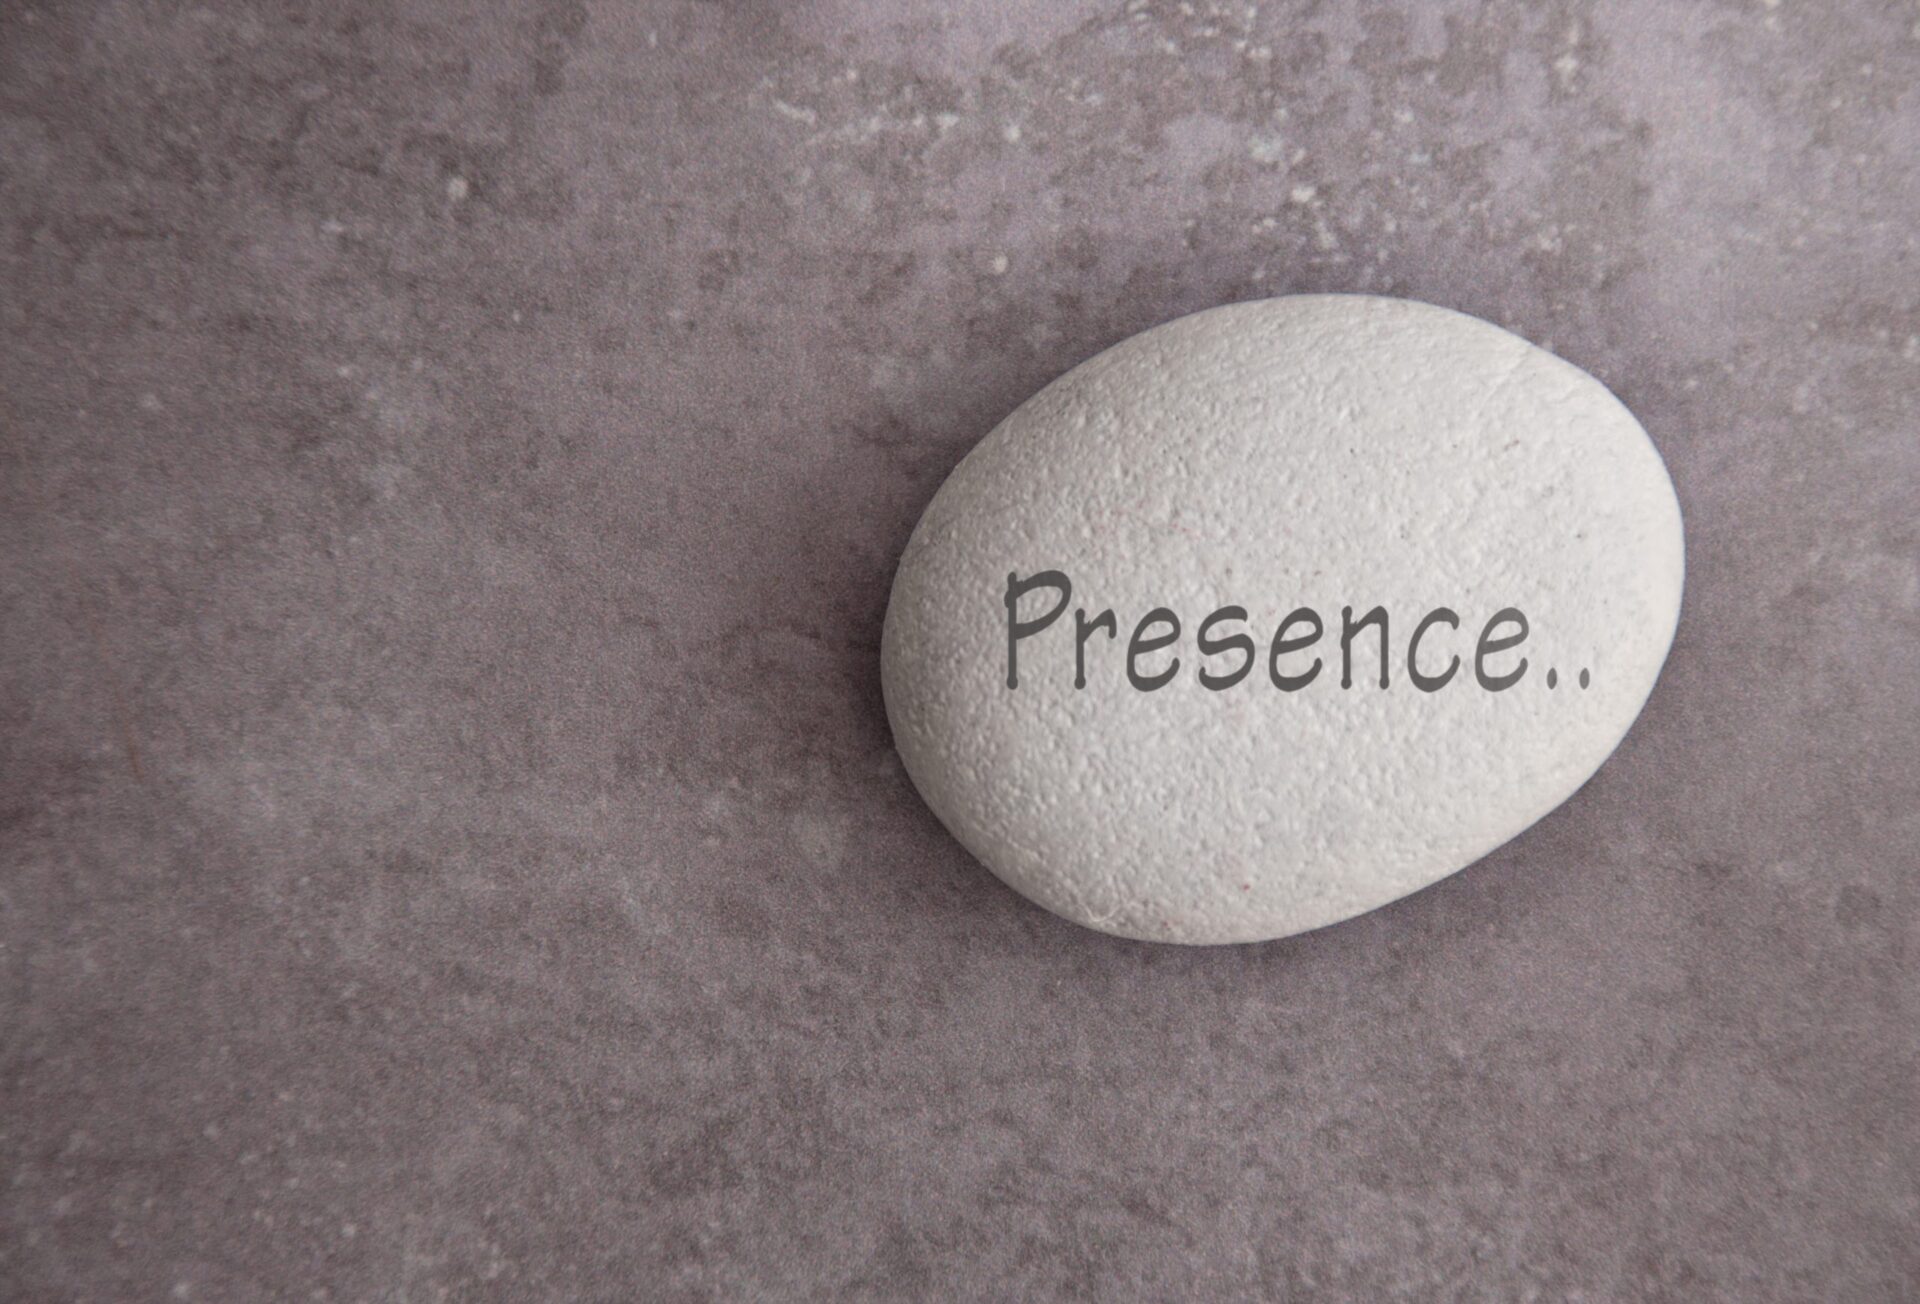 Photo of a pebble with the word 'Presence...' written on it